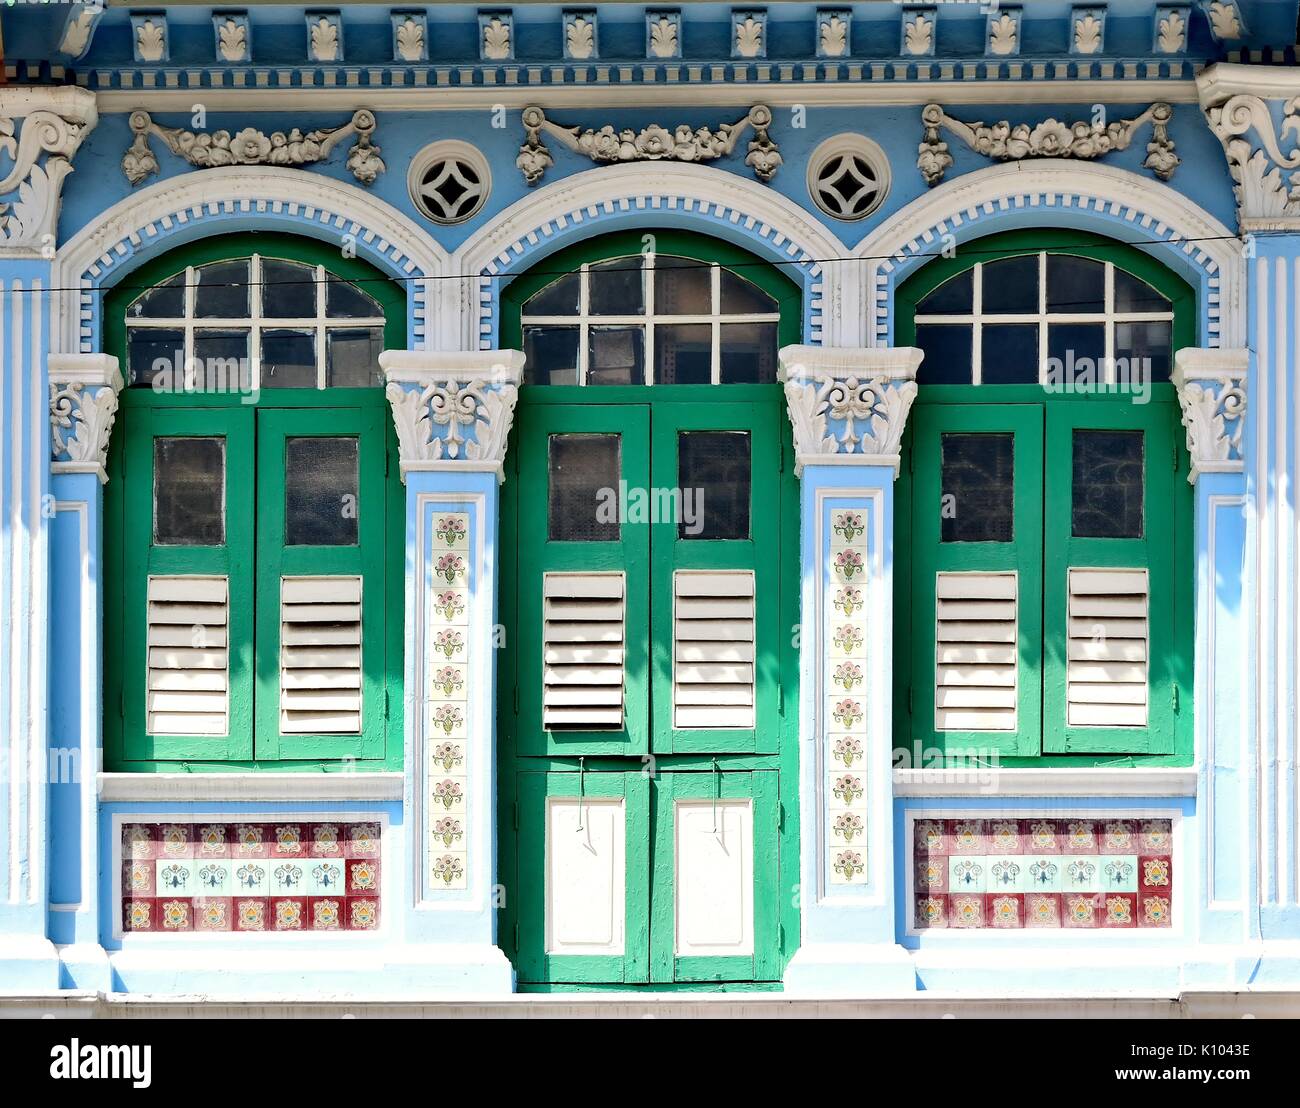 Traditional shop house exterior with green wooden louvered shutters,  arched windows ornate carvings in the Little India District of Singapore Stock Photo